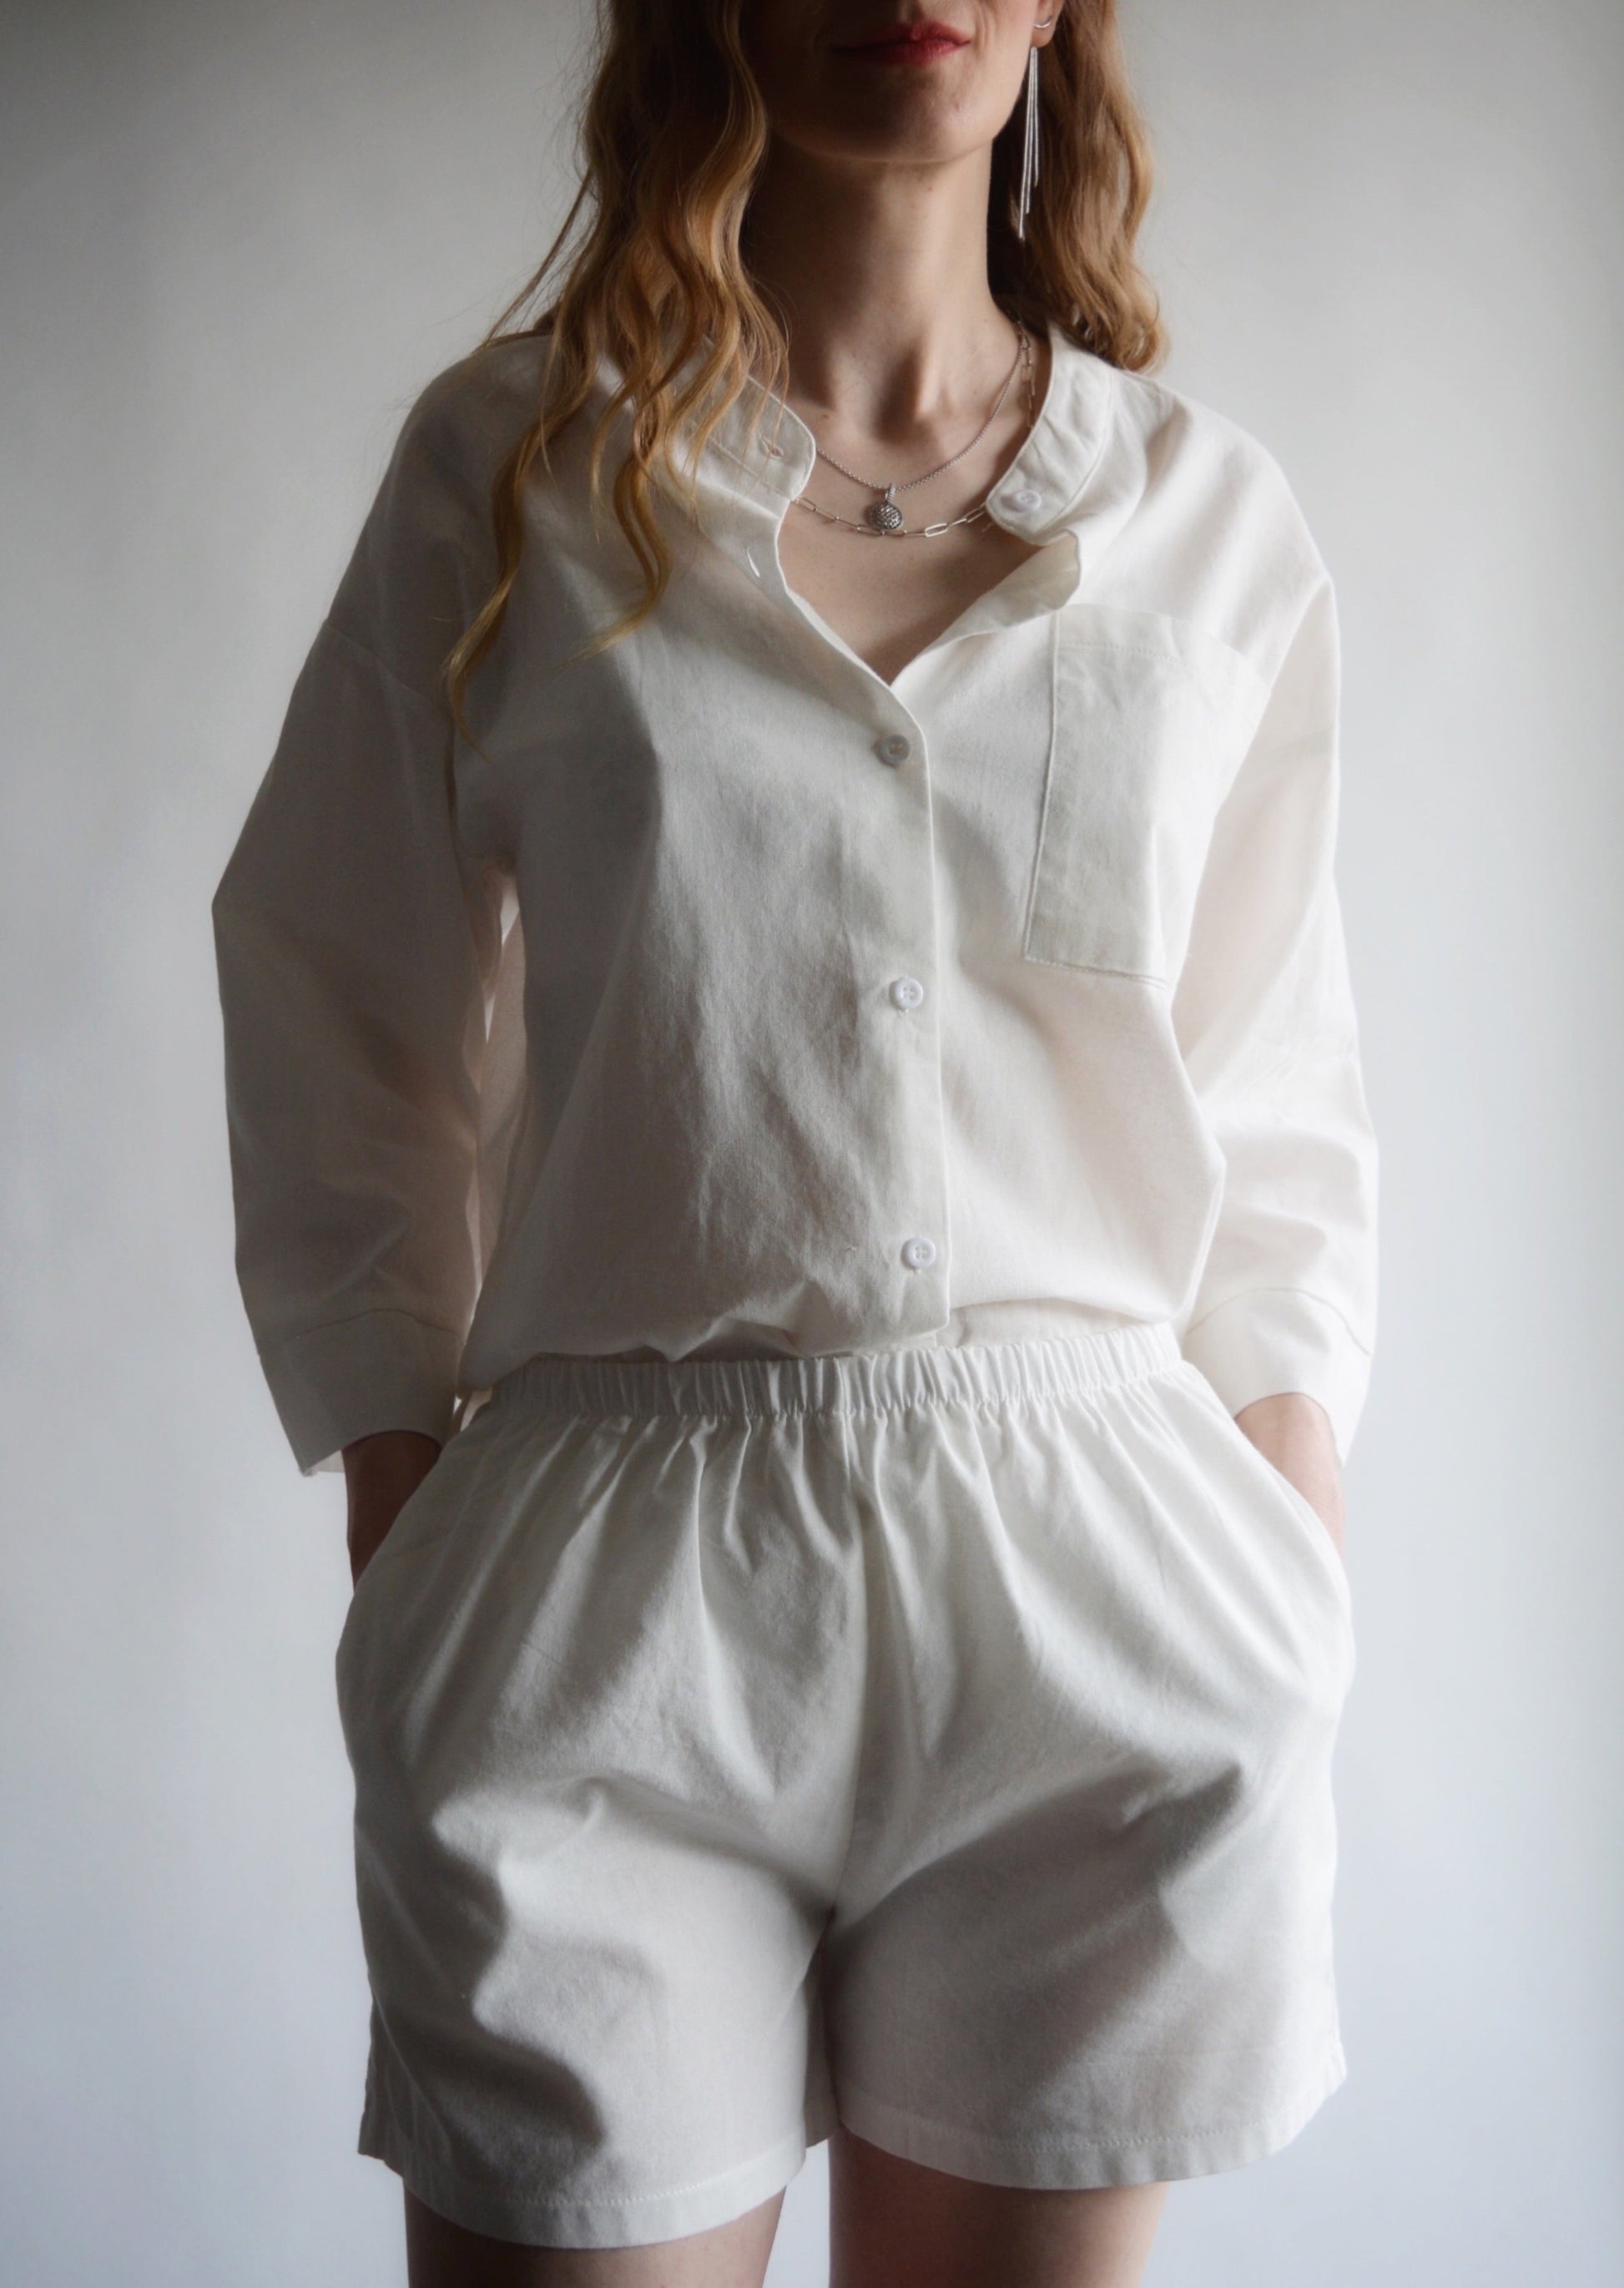 Two Piece Set - Cotton Shirt and Shorts in Porcelain (white) color